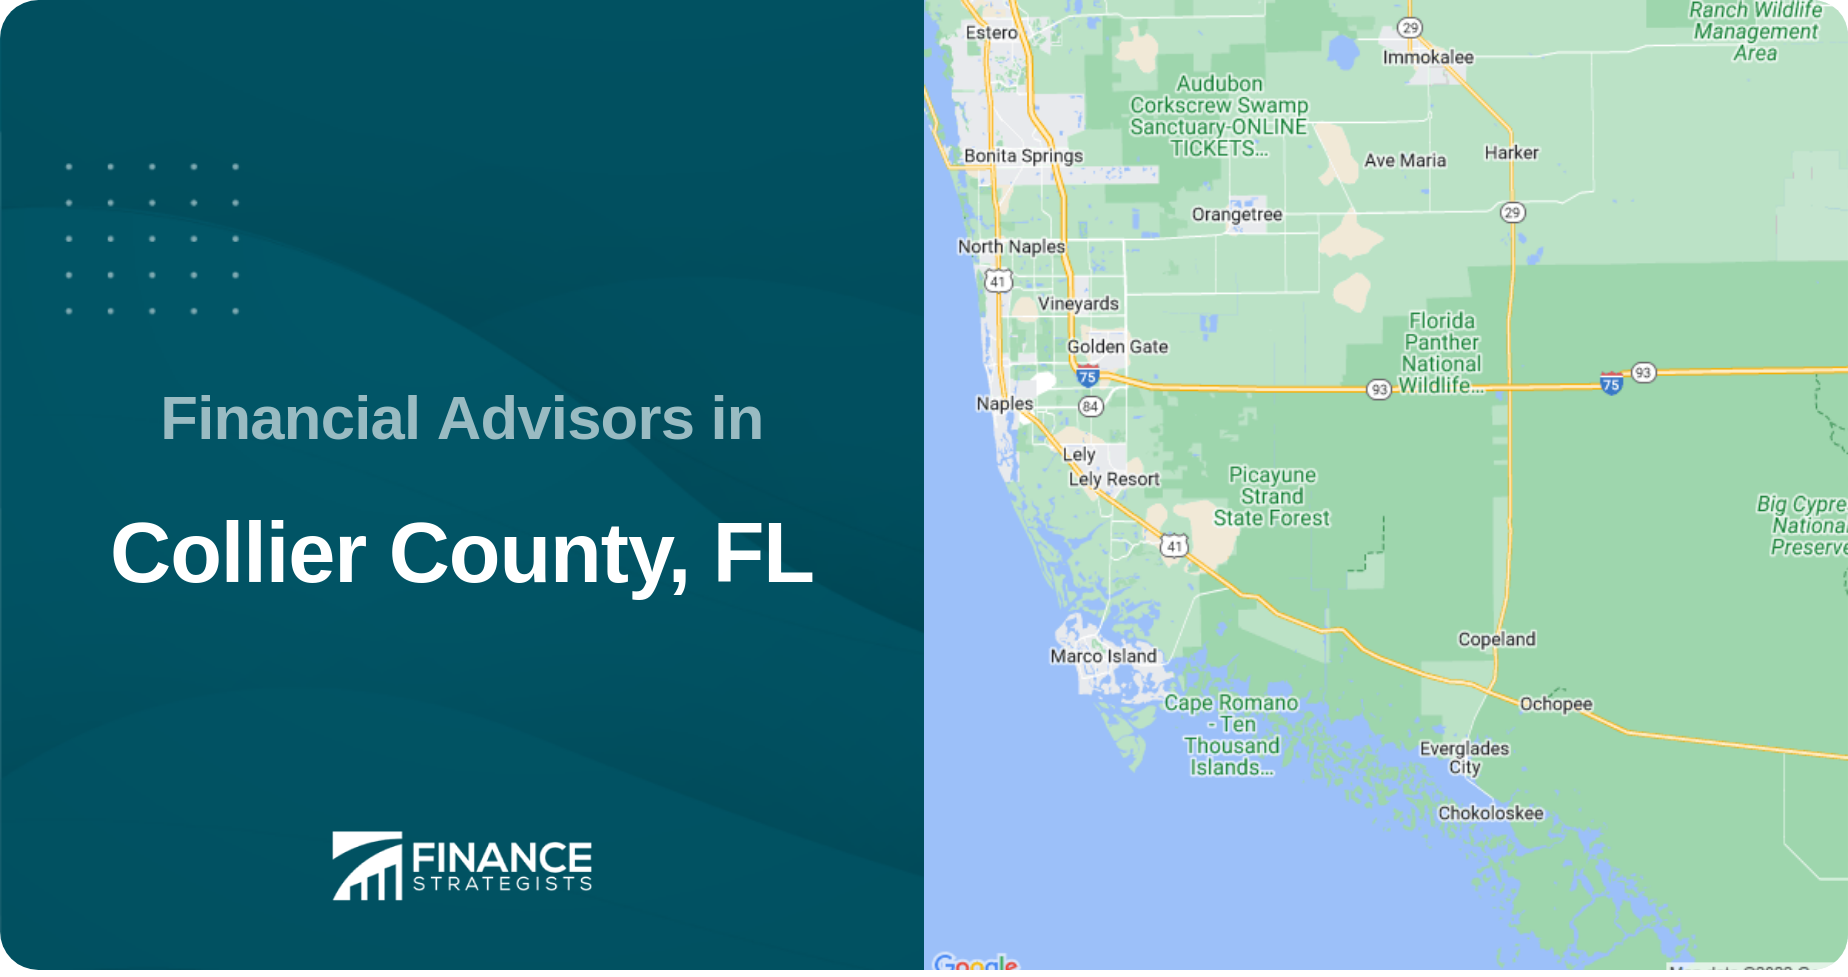 Financial Advisors in Collier County, FL